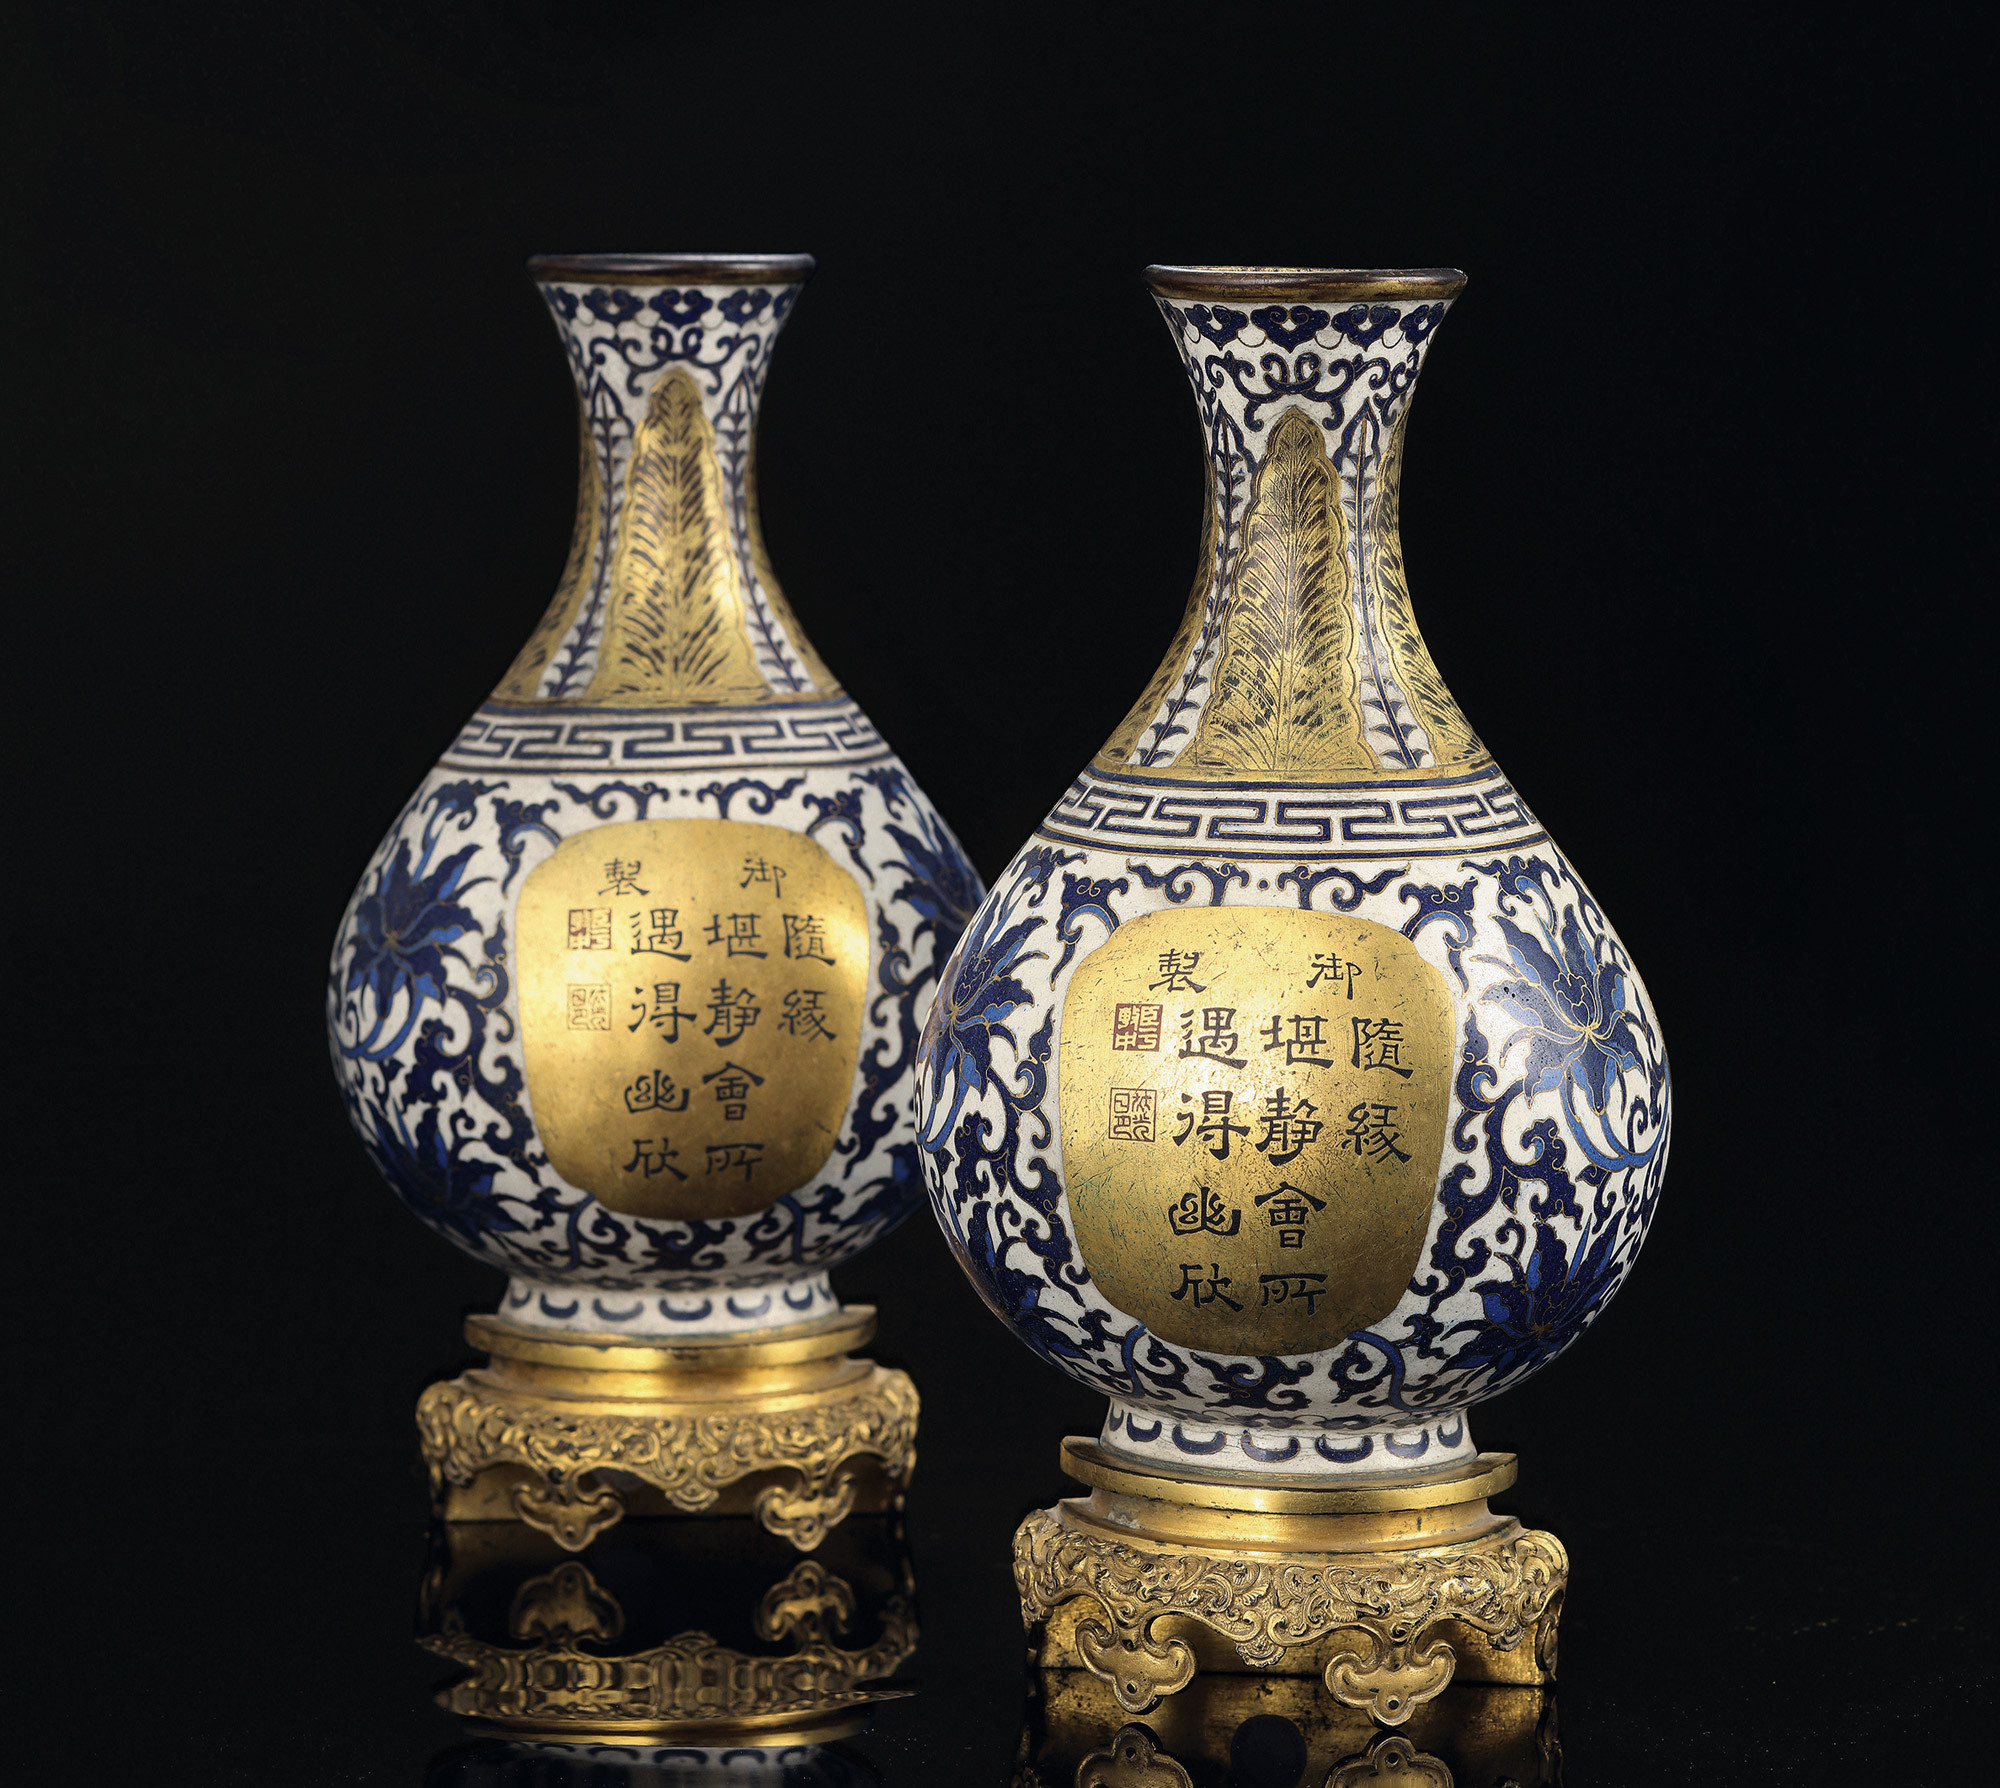 A PAIR OF GILT BRONZE AND CLOISONNE ENAMEL YUHUCHUN VASES WITH INSCRIBED IMPERIAL POEM